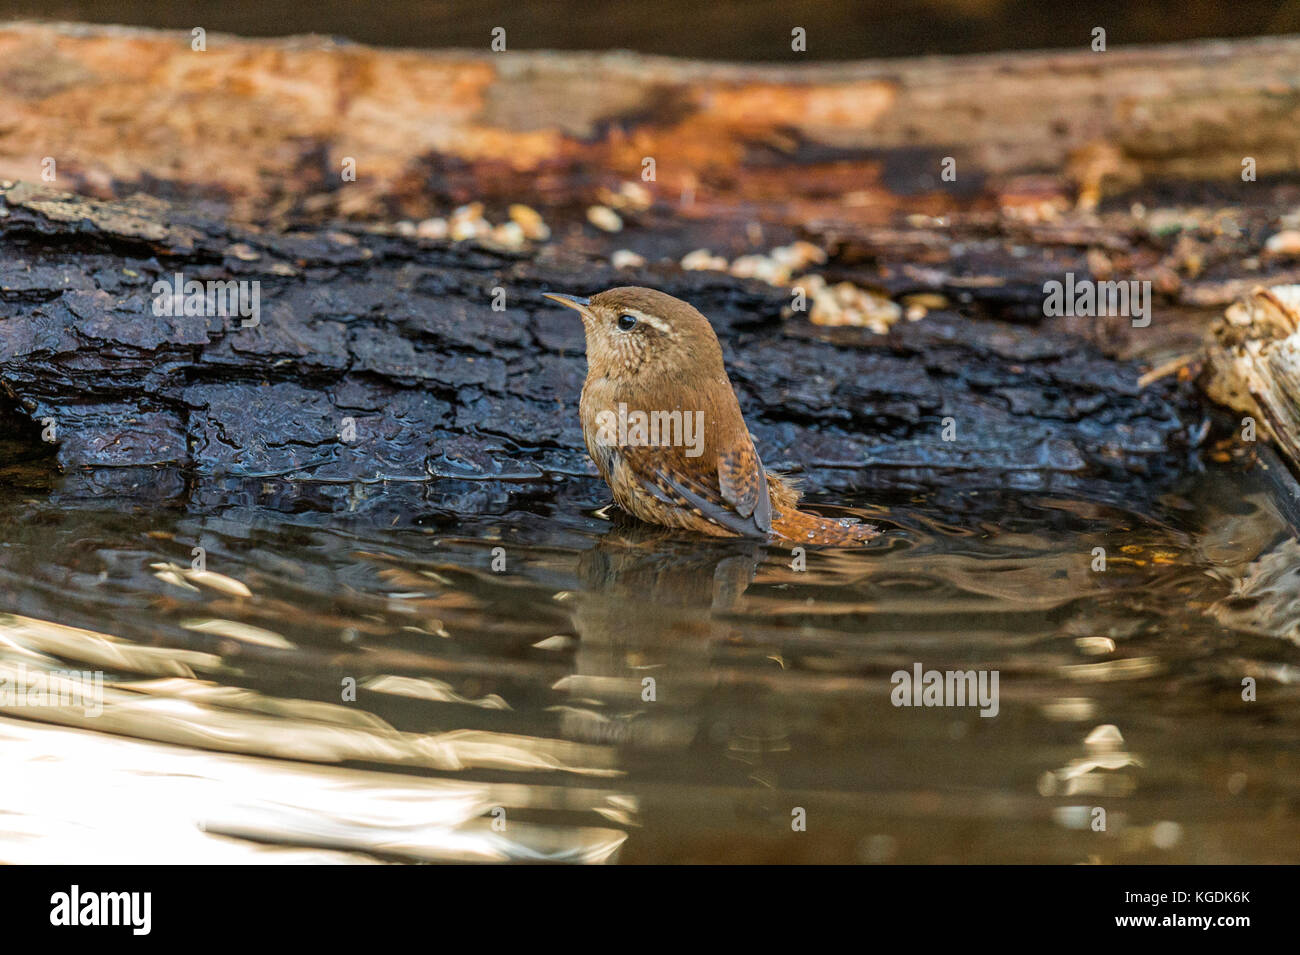 British Wildlife in Natural Habitat. Our National Treasure a beautiful Wren depicted foraging and bathing in ancient woodlands on fine autumn evening. Stock Photo